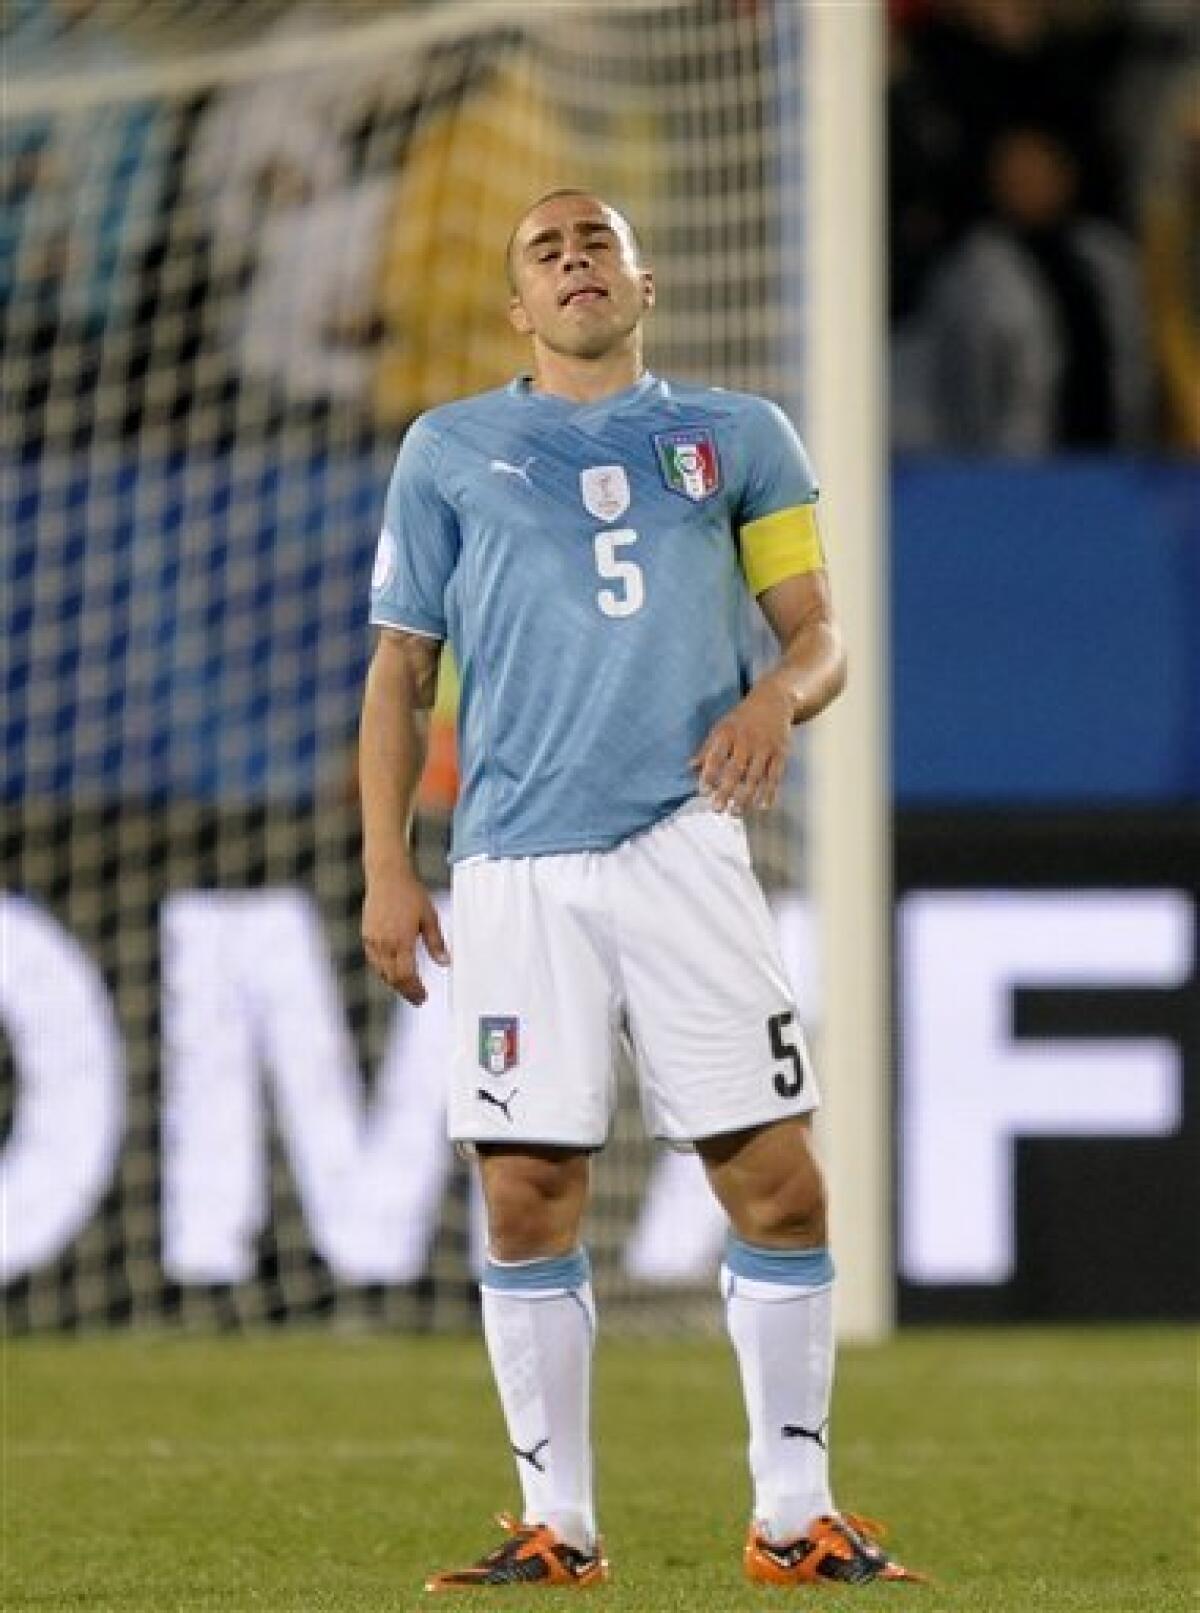 FILE - In this Sunday, June 21, 2009 file photo, Italy's Fabio Cannavaro reacts after teammate Andrea Dossena, not pictured, scored an own goal during their Confederations Cup Group B soccer match against Brazil, at Loftus Versfeld Stadium in Pretoria, South Africa. Italy captain Fabio Cannavaro has failed a doping test. His club team Juventus says, Thursday, Oct. 8, 2009, the positive exam was the result of a cortisone used to treat a bee sting. The Italian Olympic Committee's anti-doping prosecutor Ettore Torri has opened an investigation. Cannavaro was already suspended for Italy's World Cup qualifier with Ireland on Saturday, but he was expected to join the team for Wednesday's game against Cyprus. (AP Photo/Martin Meissner, File)